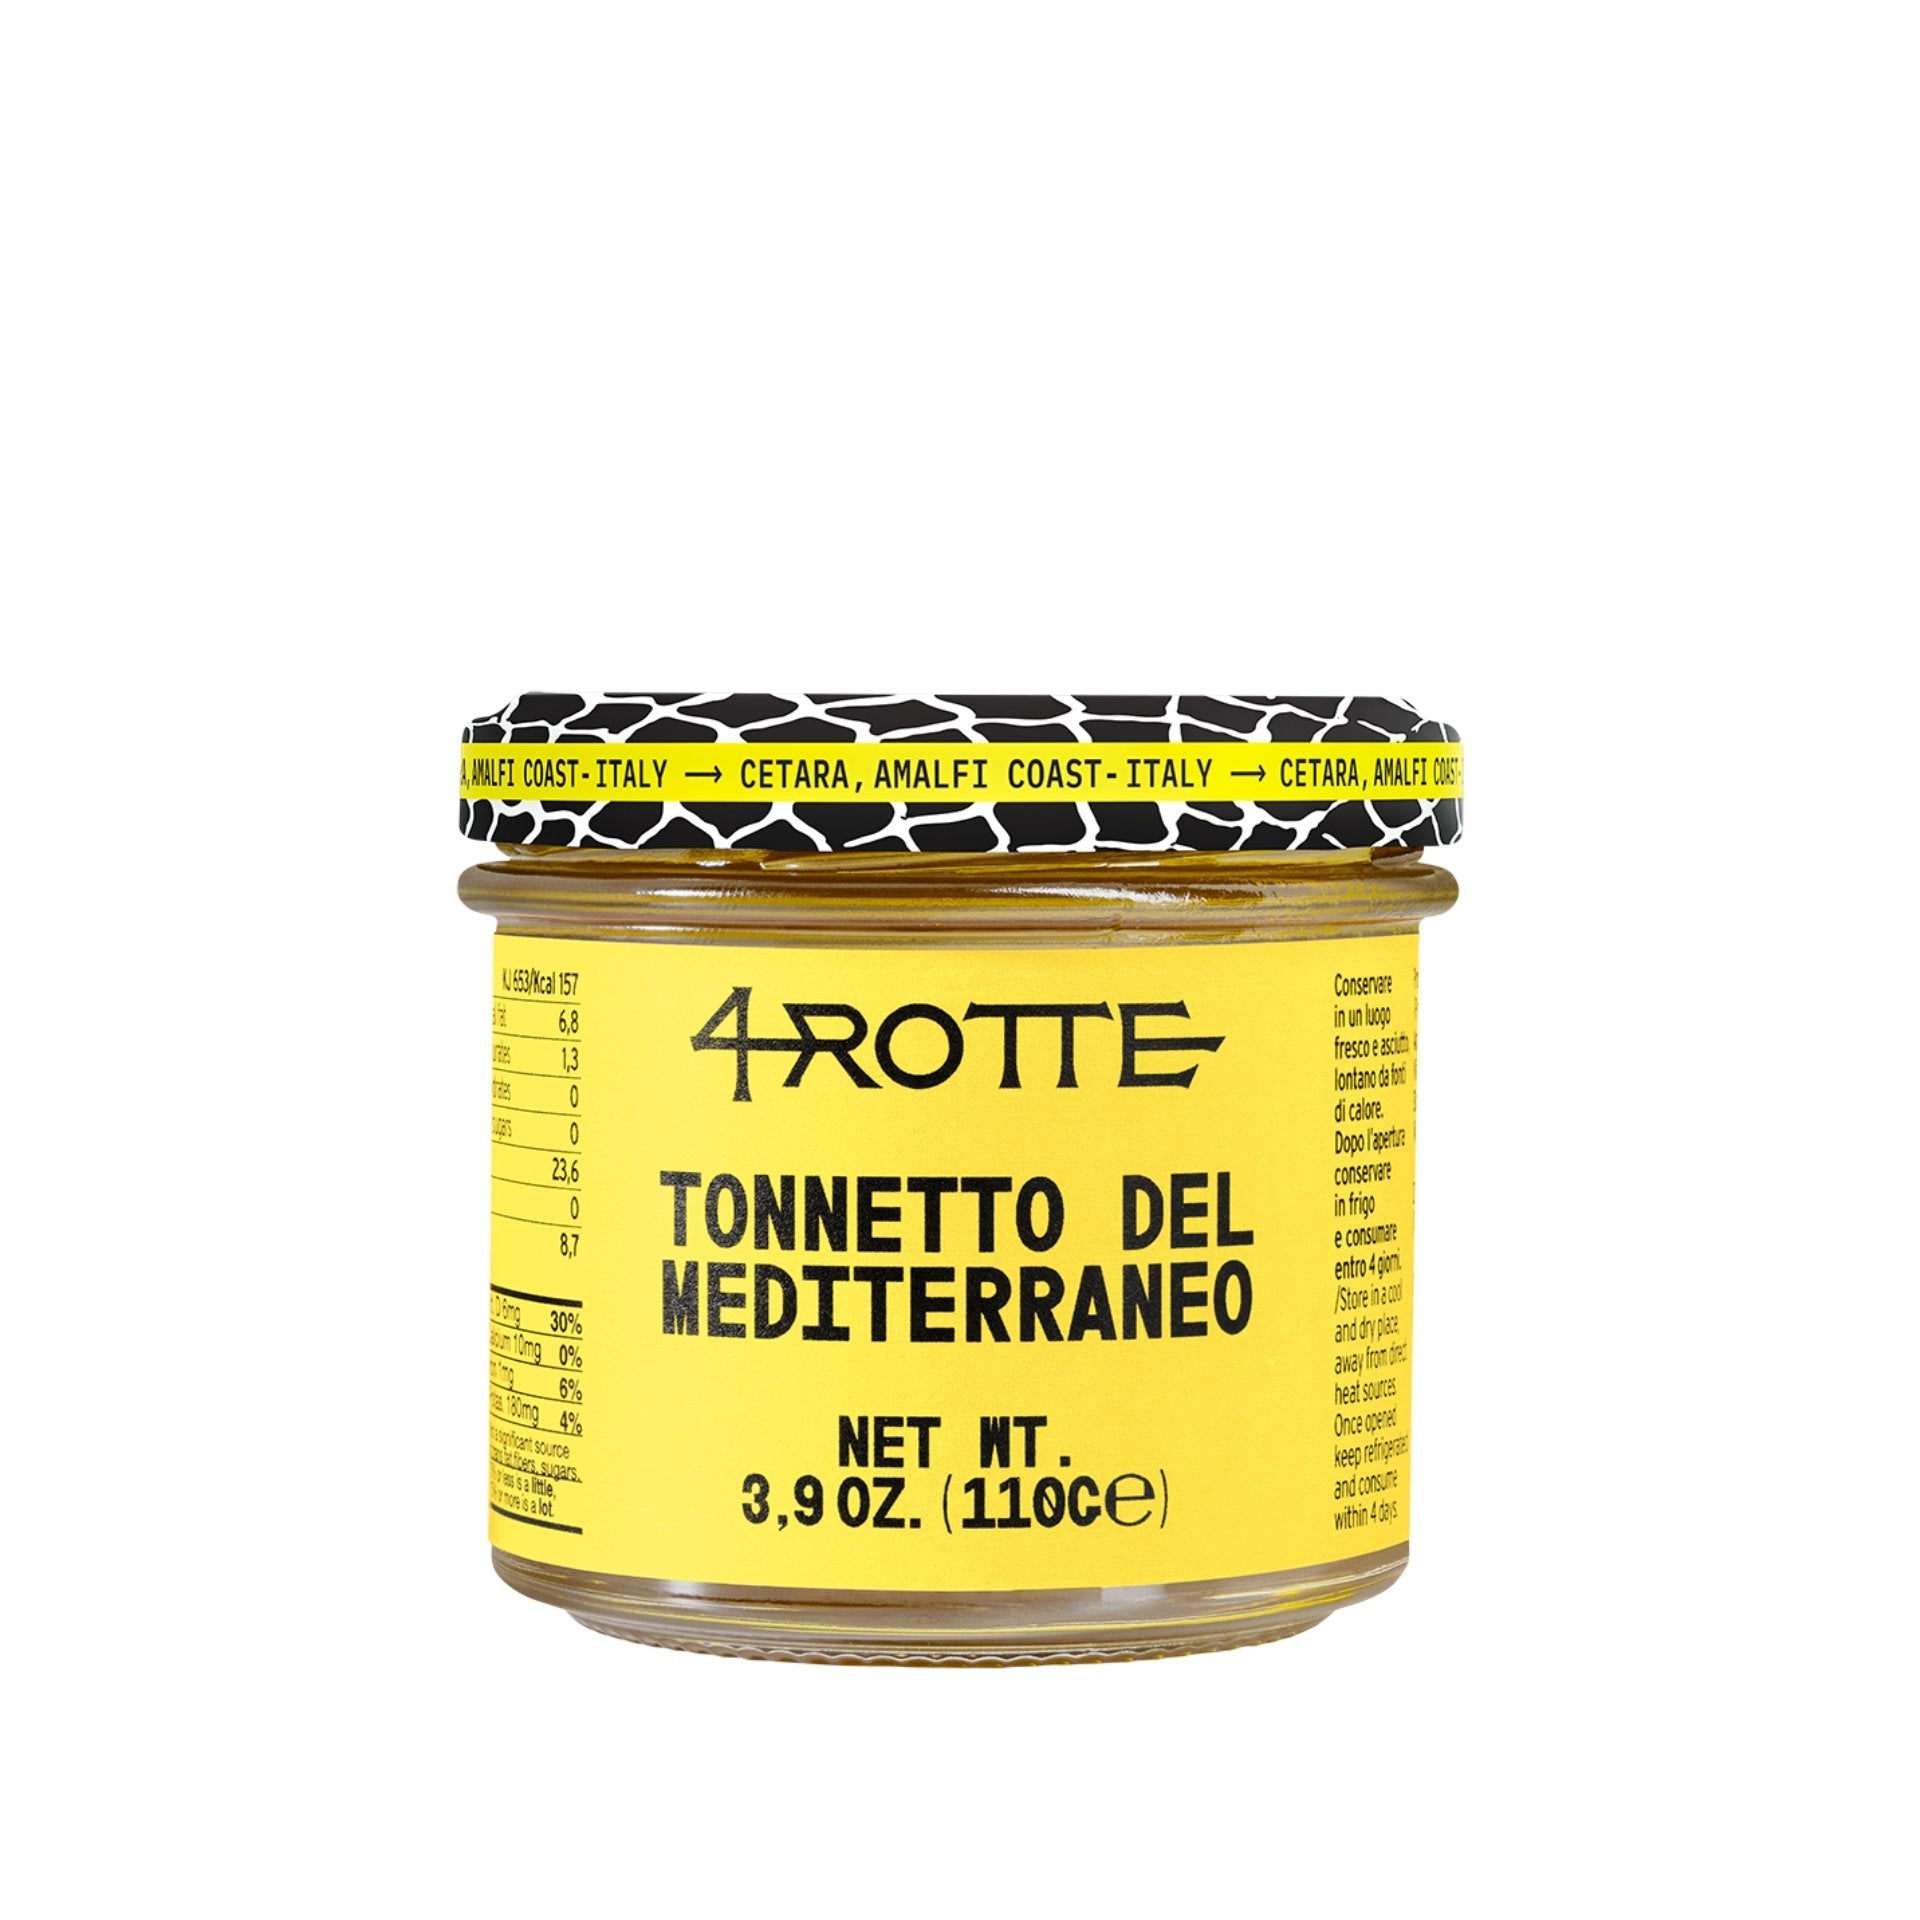 Armatore 4 Rotte Little Tunny Tuna Fillets in Olive Oil 110g  | Imported and distributed in the UK by Just Gourmet Foods